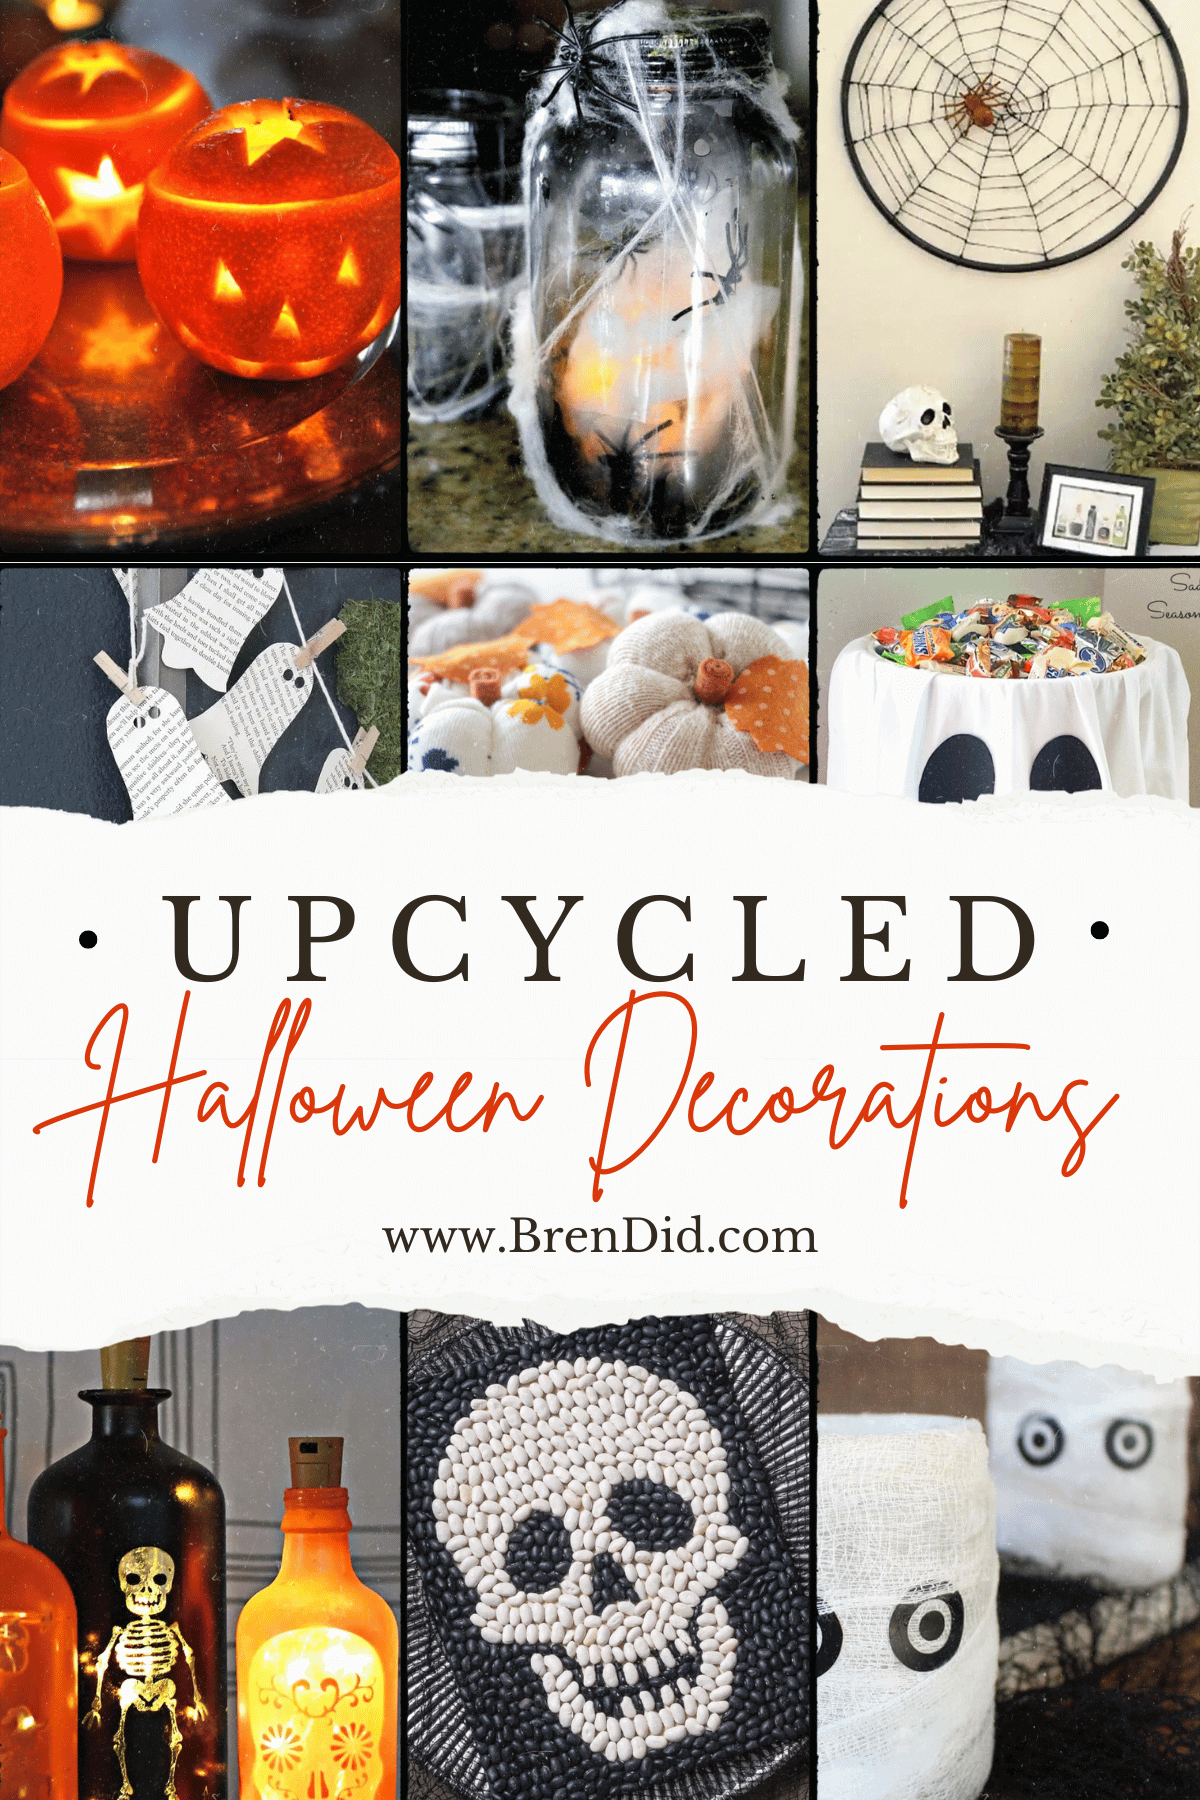 Decorative Trash Cans - Ideas on Foter